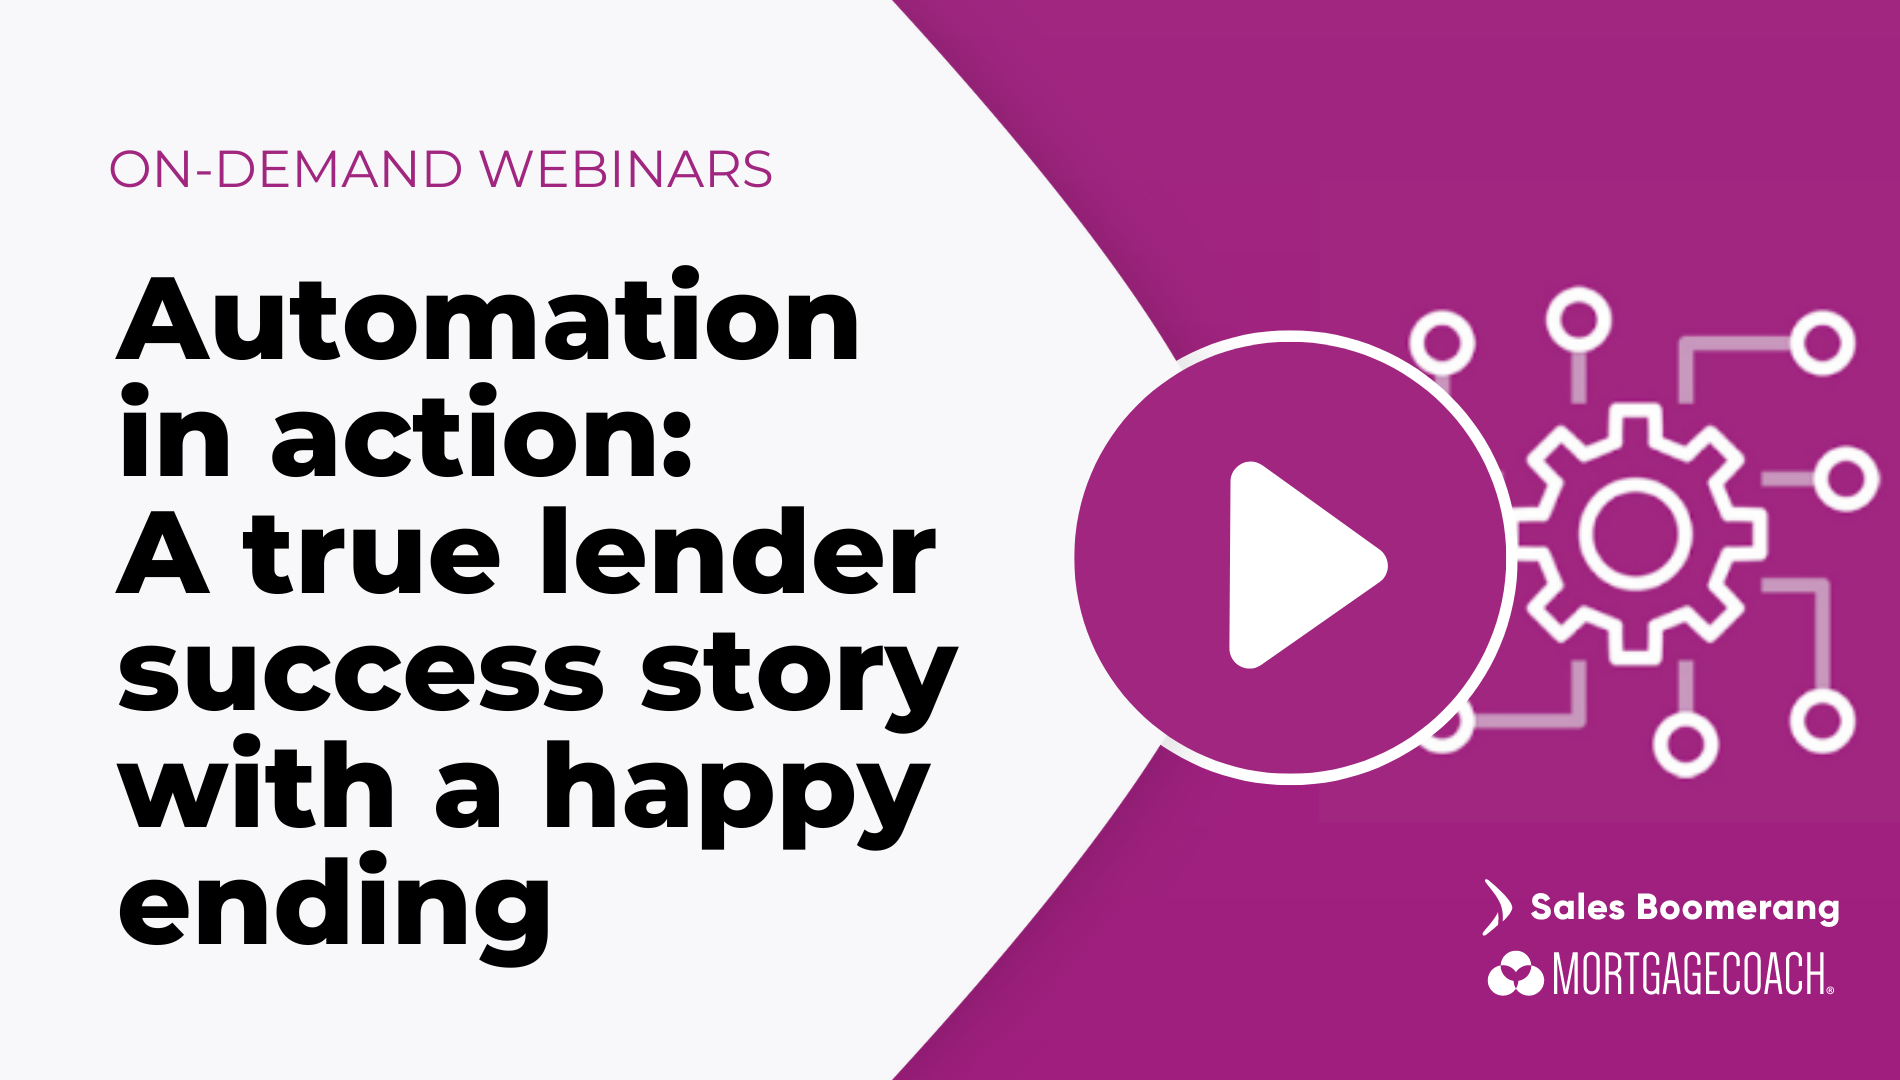 Automation in action: A true lender success story with a happy ending